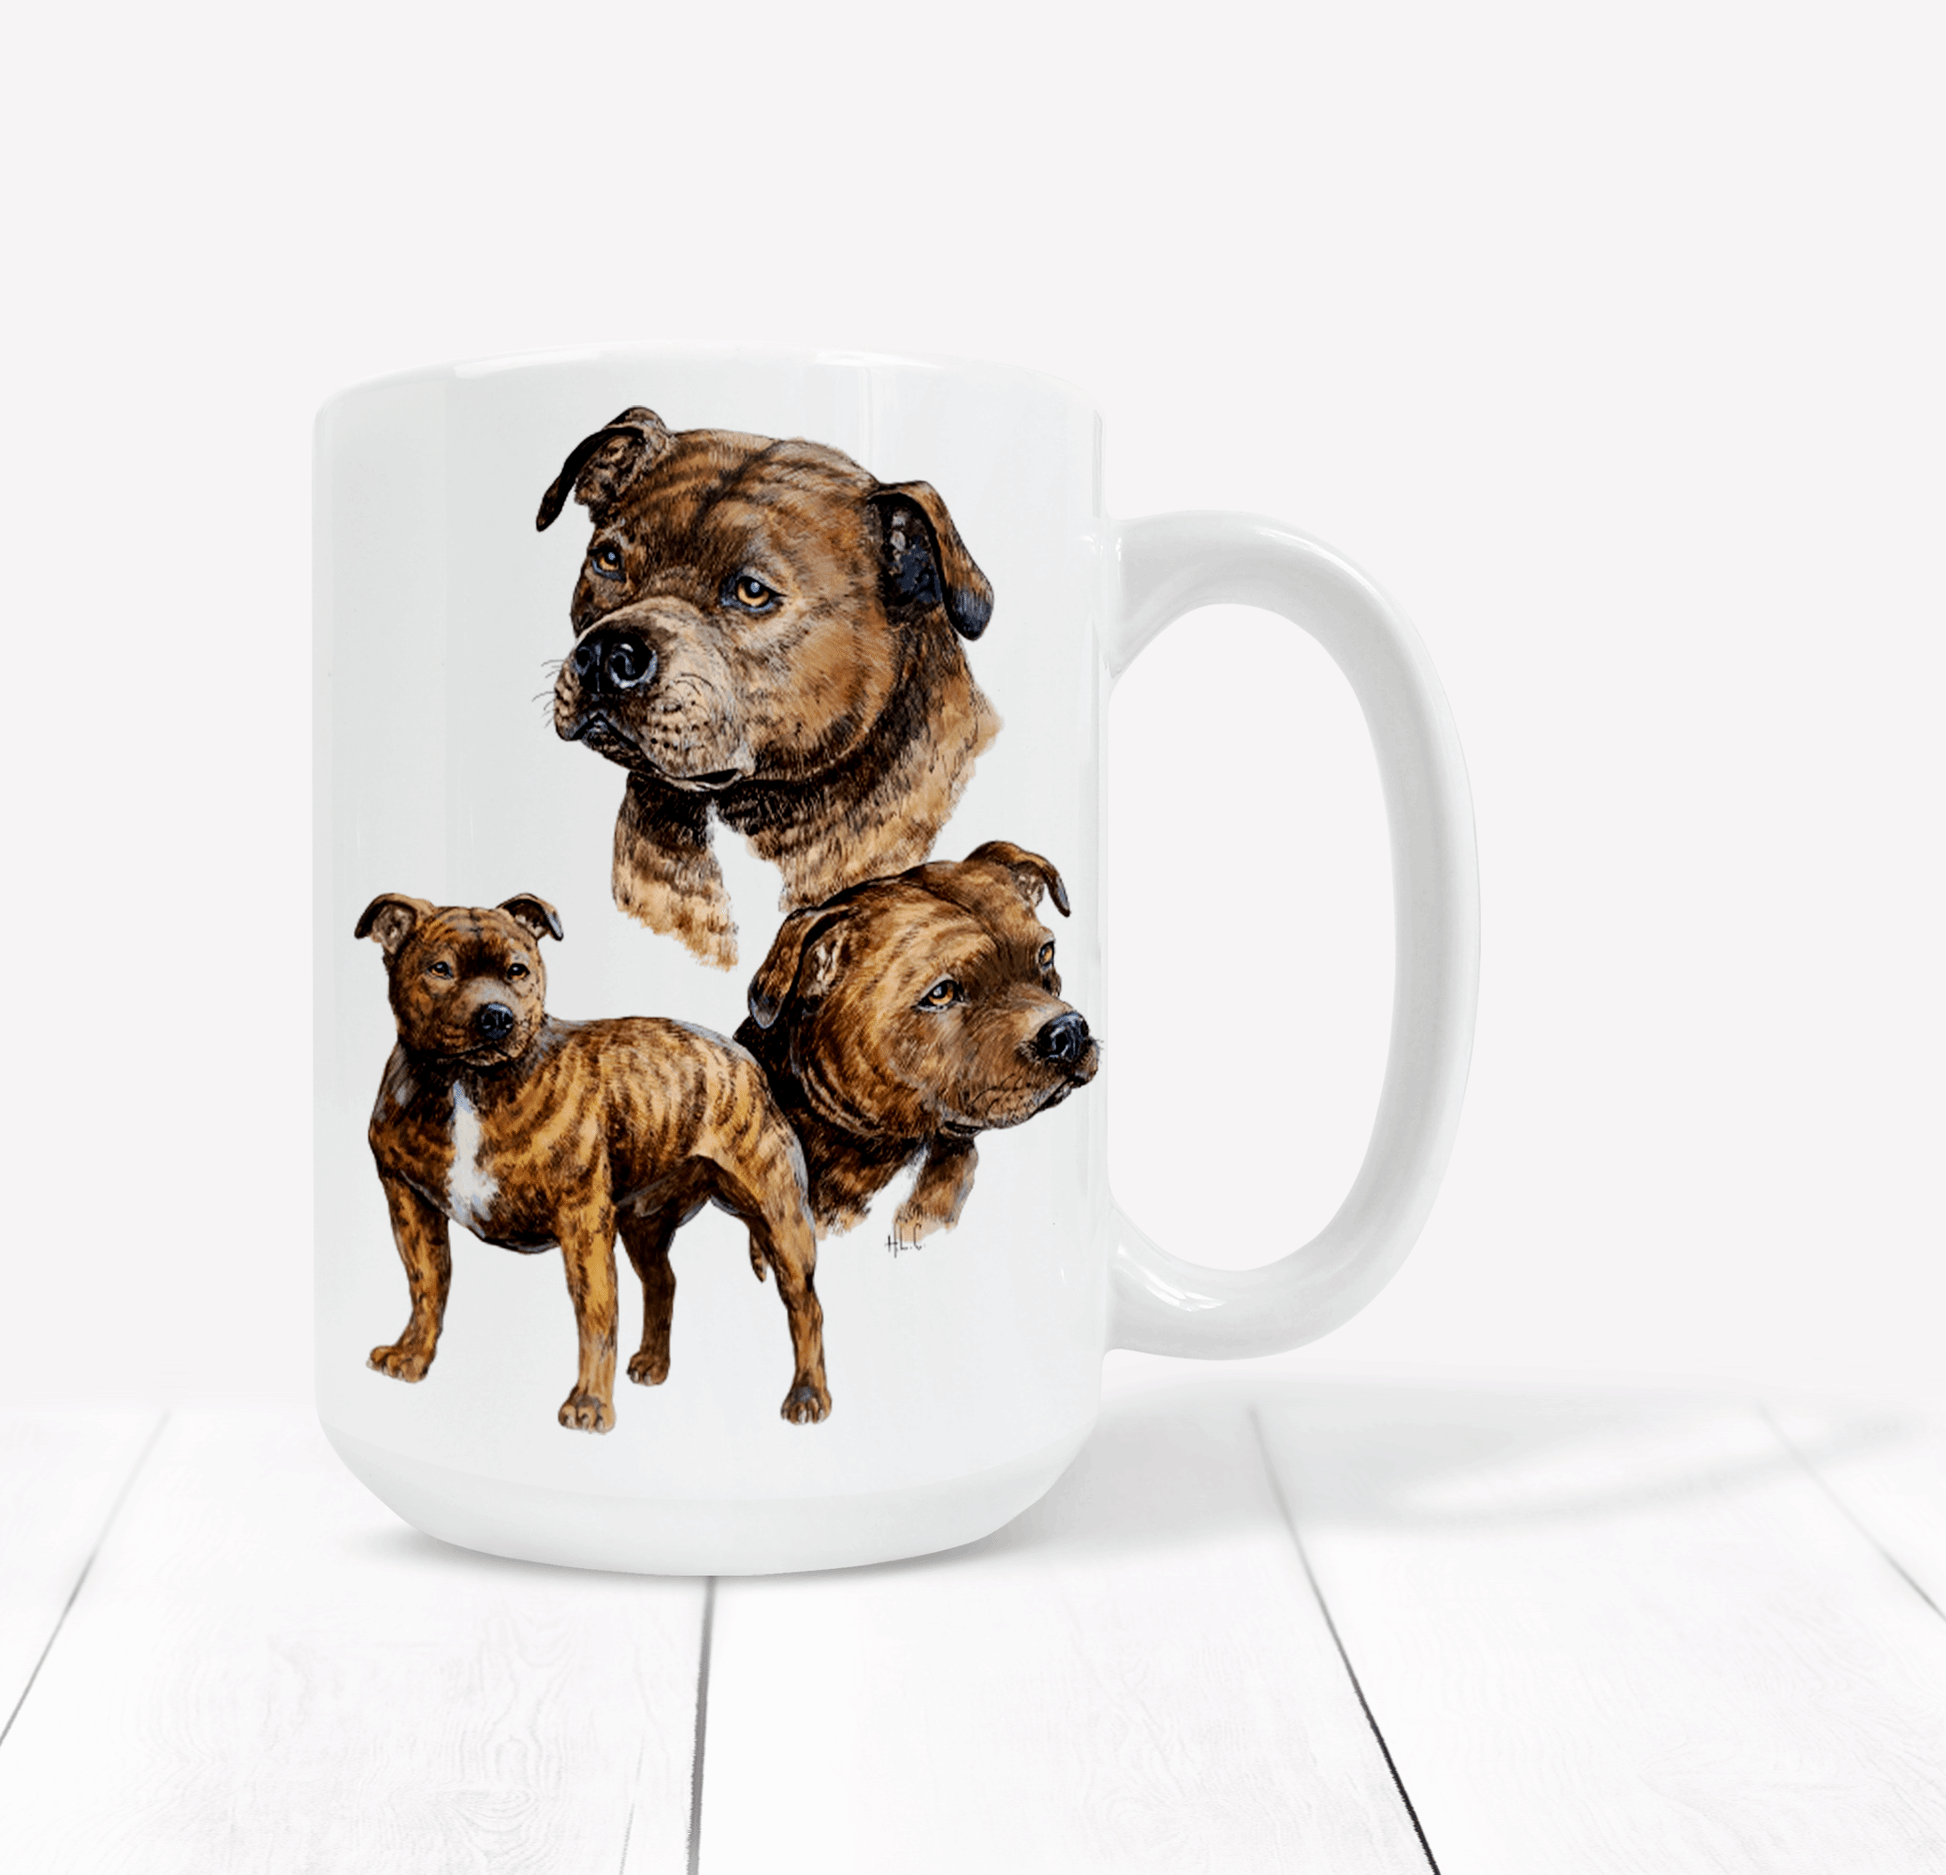  Trio of Brindle Staffordshire Bull Terriers Mugs by Free Spirit Accessories sold by Free Spirit Accessories